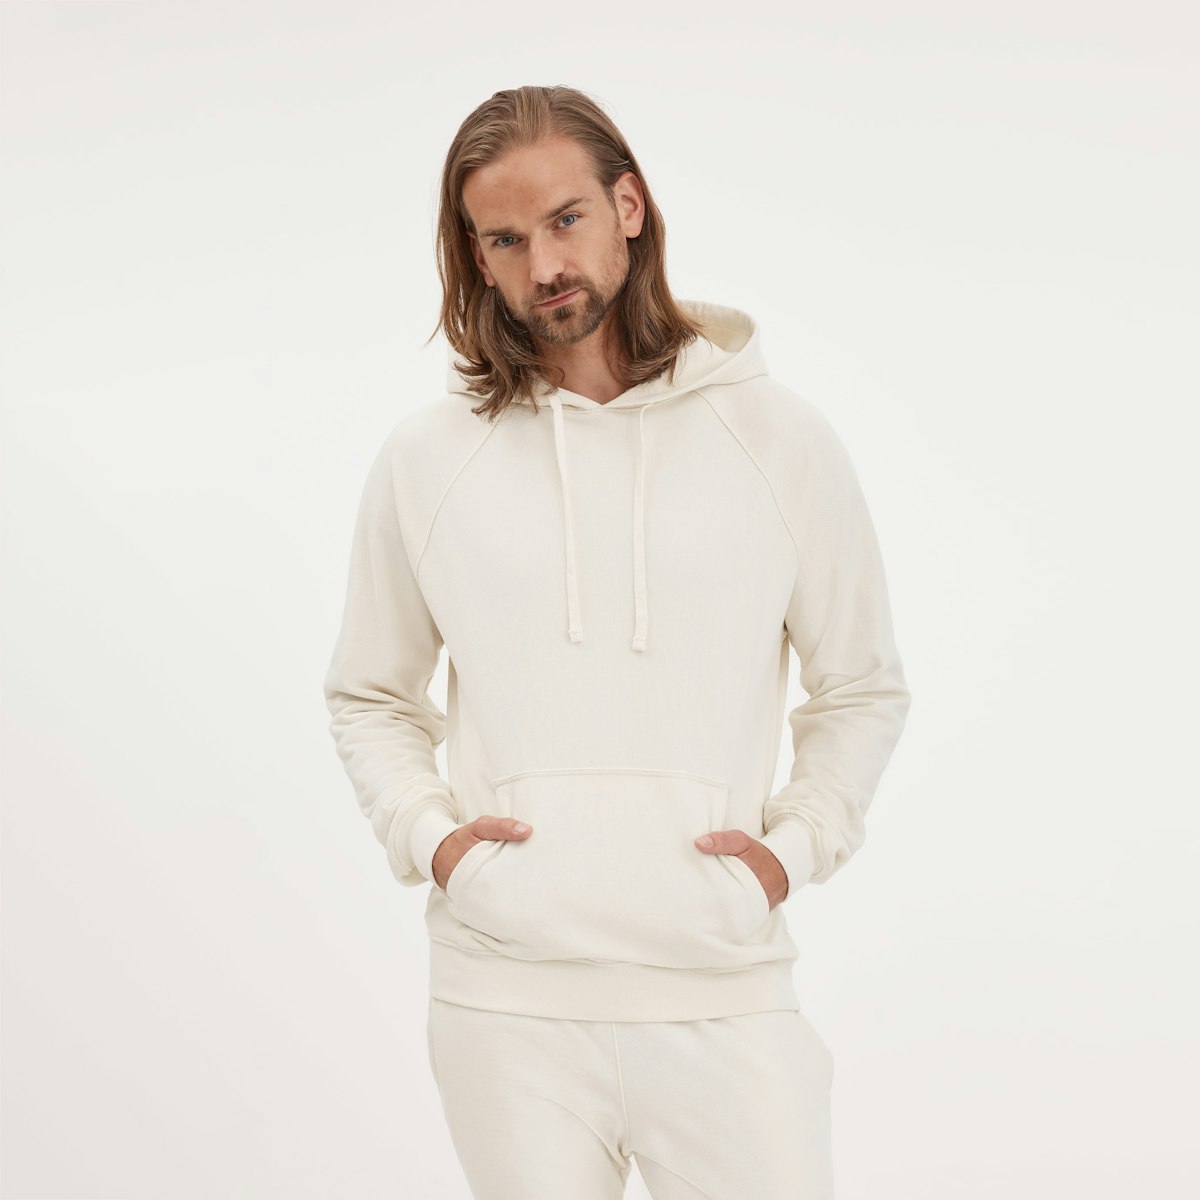 UnisexRecycledTerryHoodie_OffWhite_Mens_OnFigure_1x1_0951.jpg